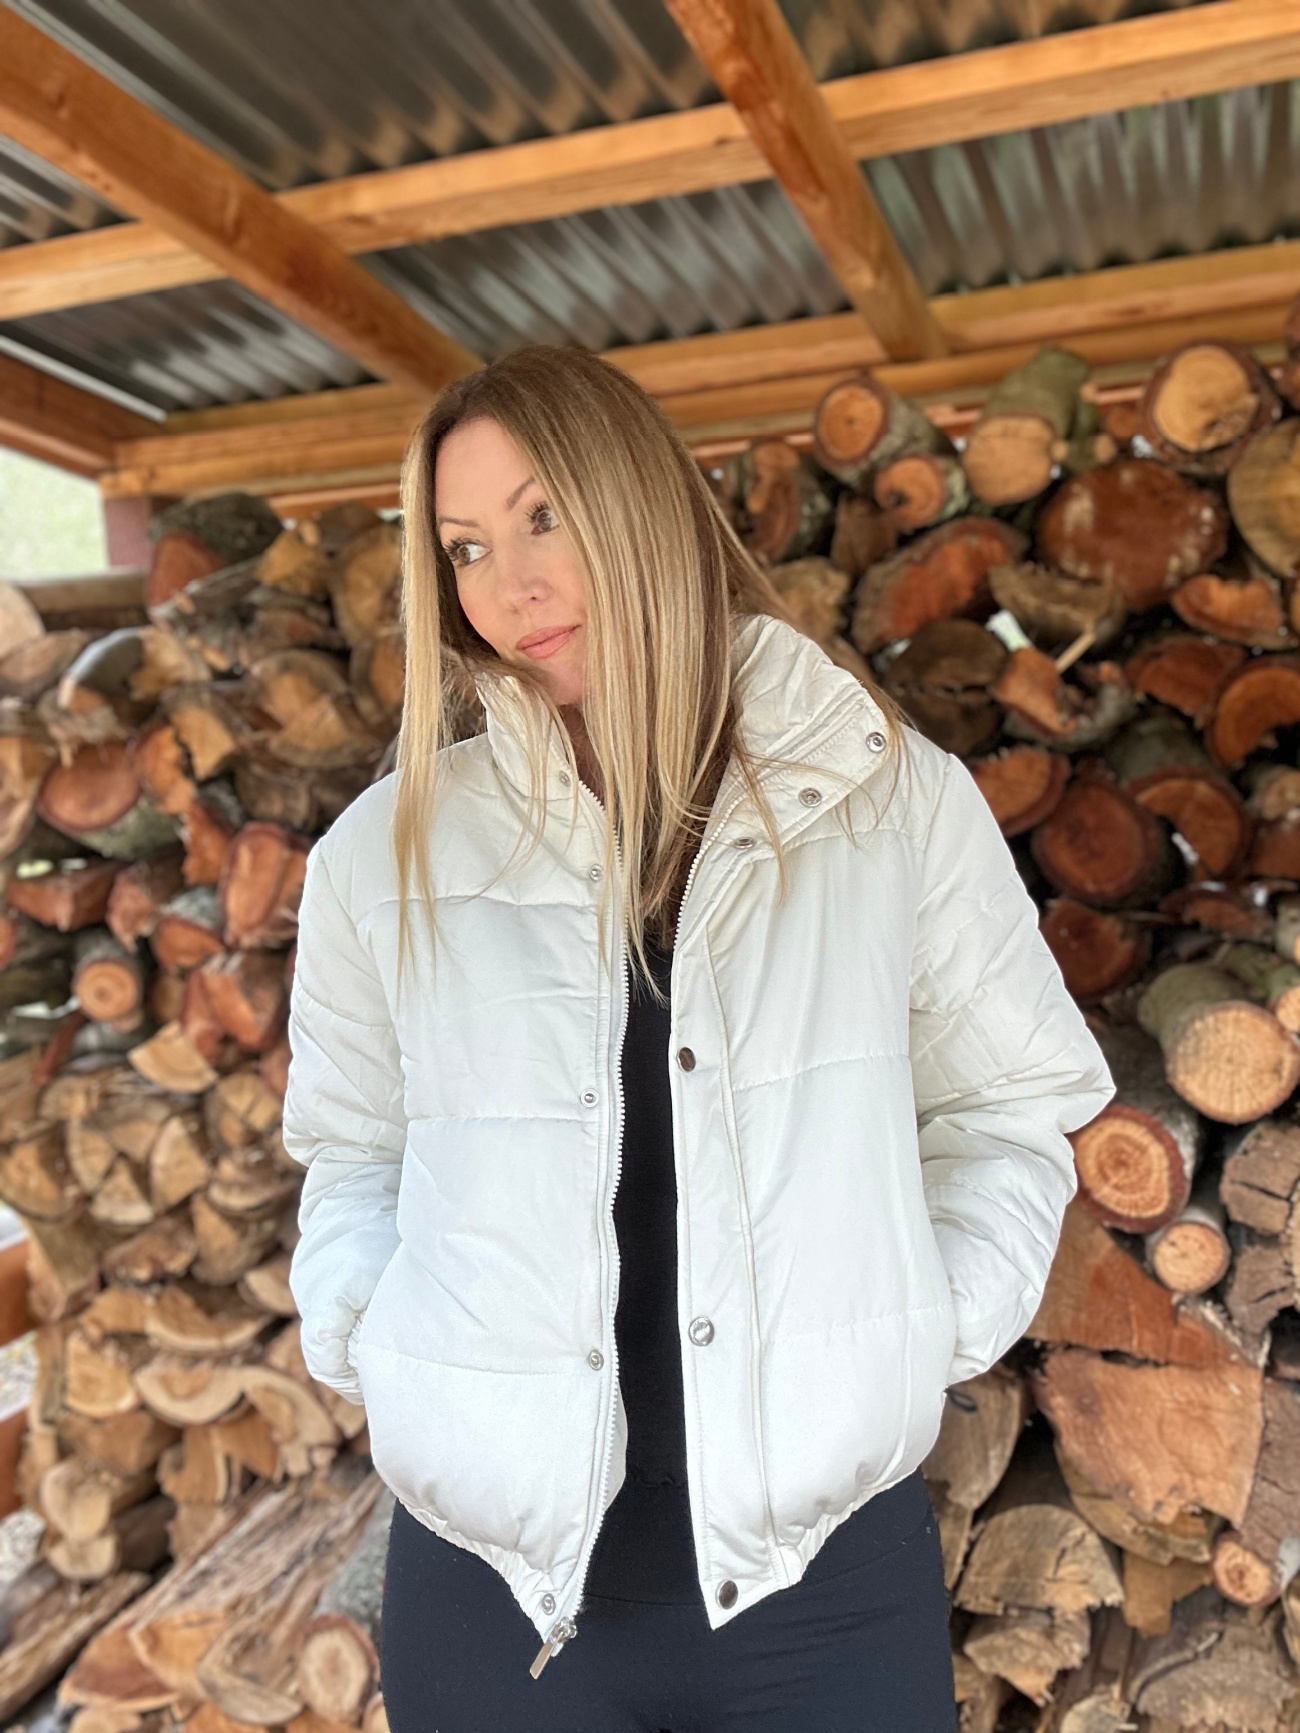 the stylish housewife » Blog Archive Puffy Jacket - the stylish housewife